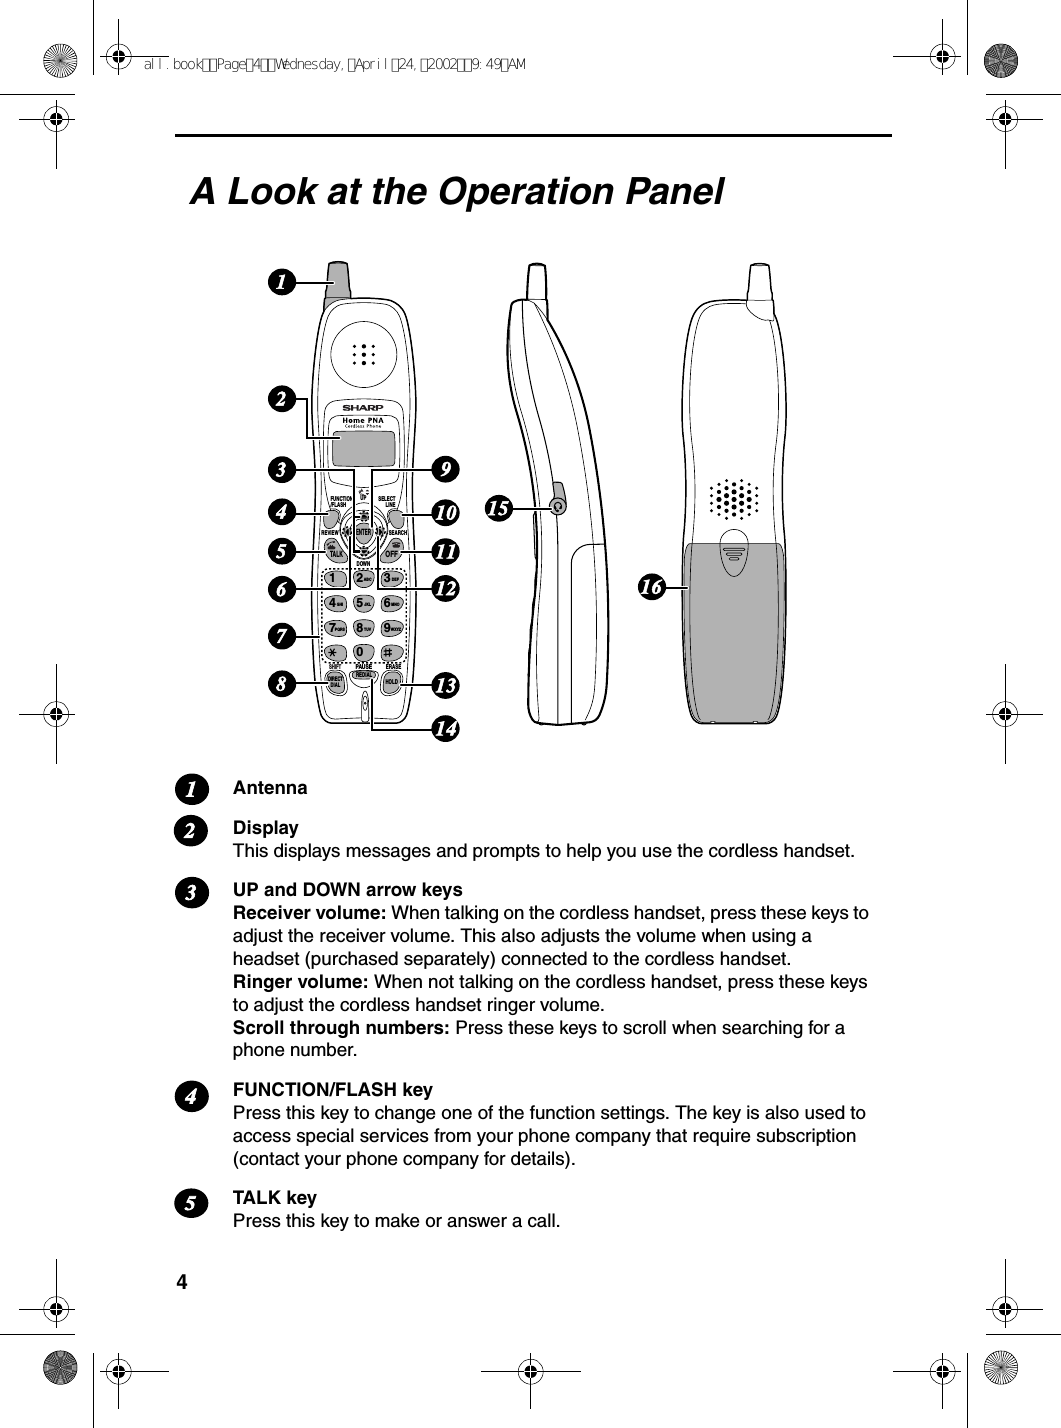 4A Look at the Operation PanelAntennaDisplayThis displays messages and prompts to help you use the cordless handset.UP and DOWN arrow keysReceiver volume: When talking on the cordless handset, press these keys to adjust the receiver volume. This also adjusts the volume when using a headset (purchased separately) connected to the cordless handset.Ringer volume: When not talking on the cordless handset, press these keys to adjust the cordless handset ringer volume.Scroll through numbers: Press these keys to scroll when searching for a phone number.FUNCTION/FLASH keyPress this key to change one of the function settings. The key is also used to access special services from your phone company that require subscription (contact your phone company for details).TALK keyPress this key to make or answer a call. 12345TALKOFFENTERUPDOWNREVIEWDIRECTDIAL HOLDREDIALSEARCH1ABC DEFJKLGHI MNOTUVPQRS WXYZ234567890SELECTLINEFUNCTION/FLASHERASEPAUSE78131345611141092121516SHIFTall.bookPage4Wednesday,April24,20029:49AM